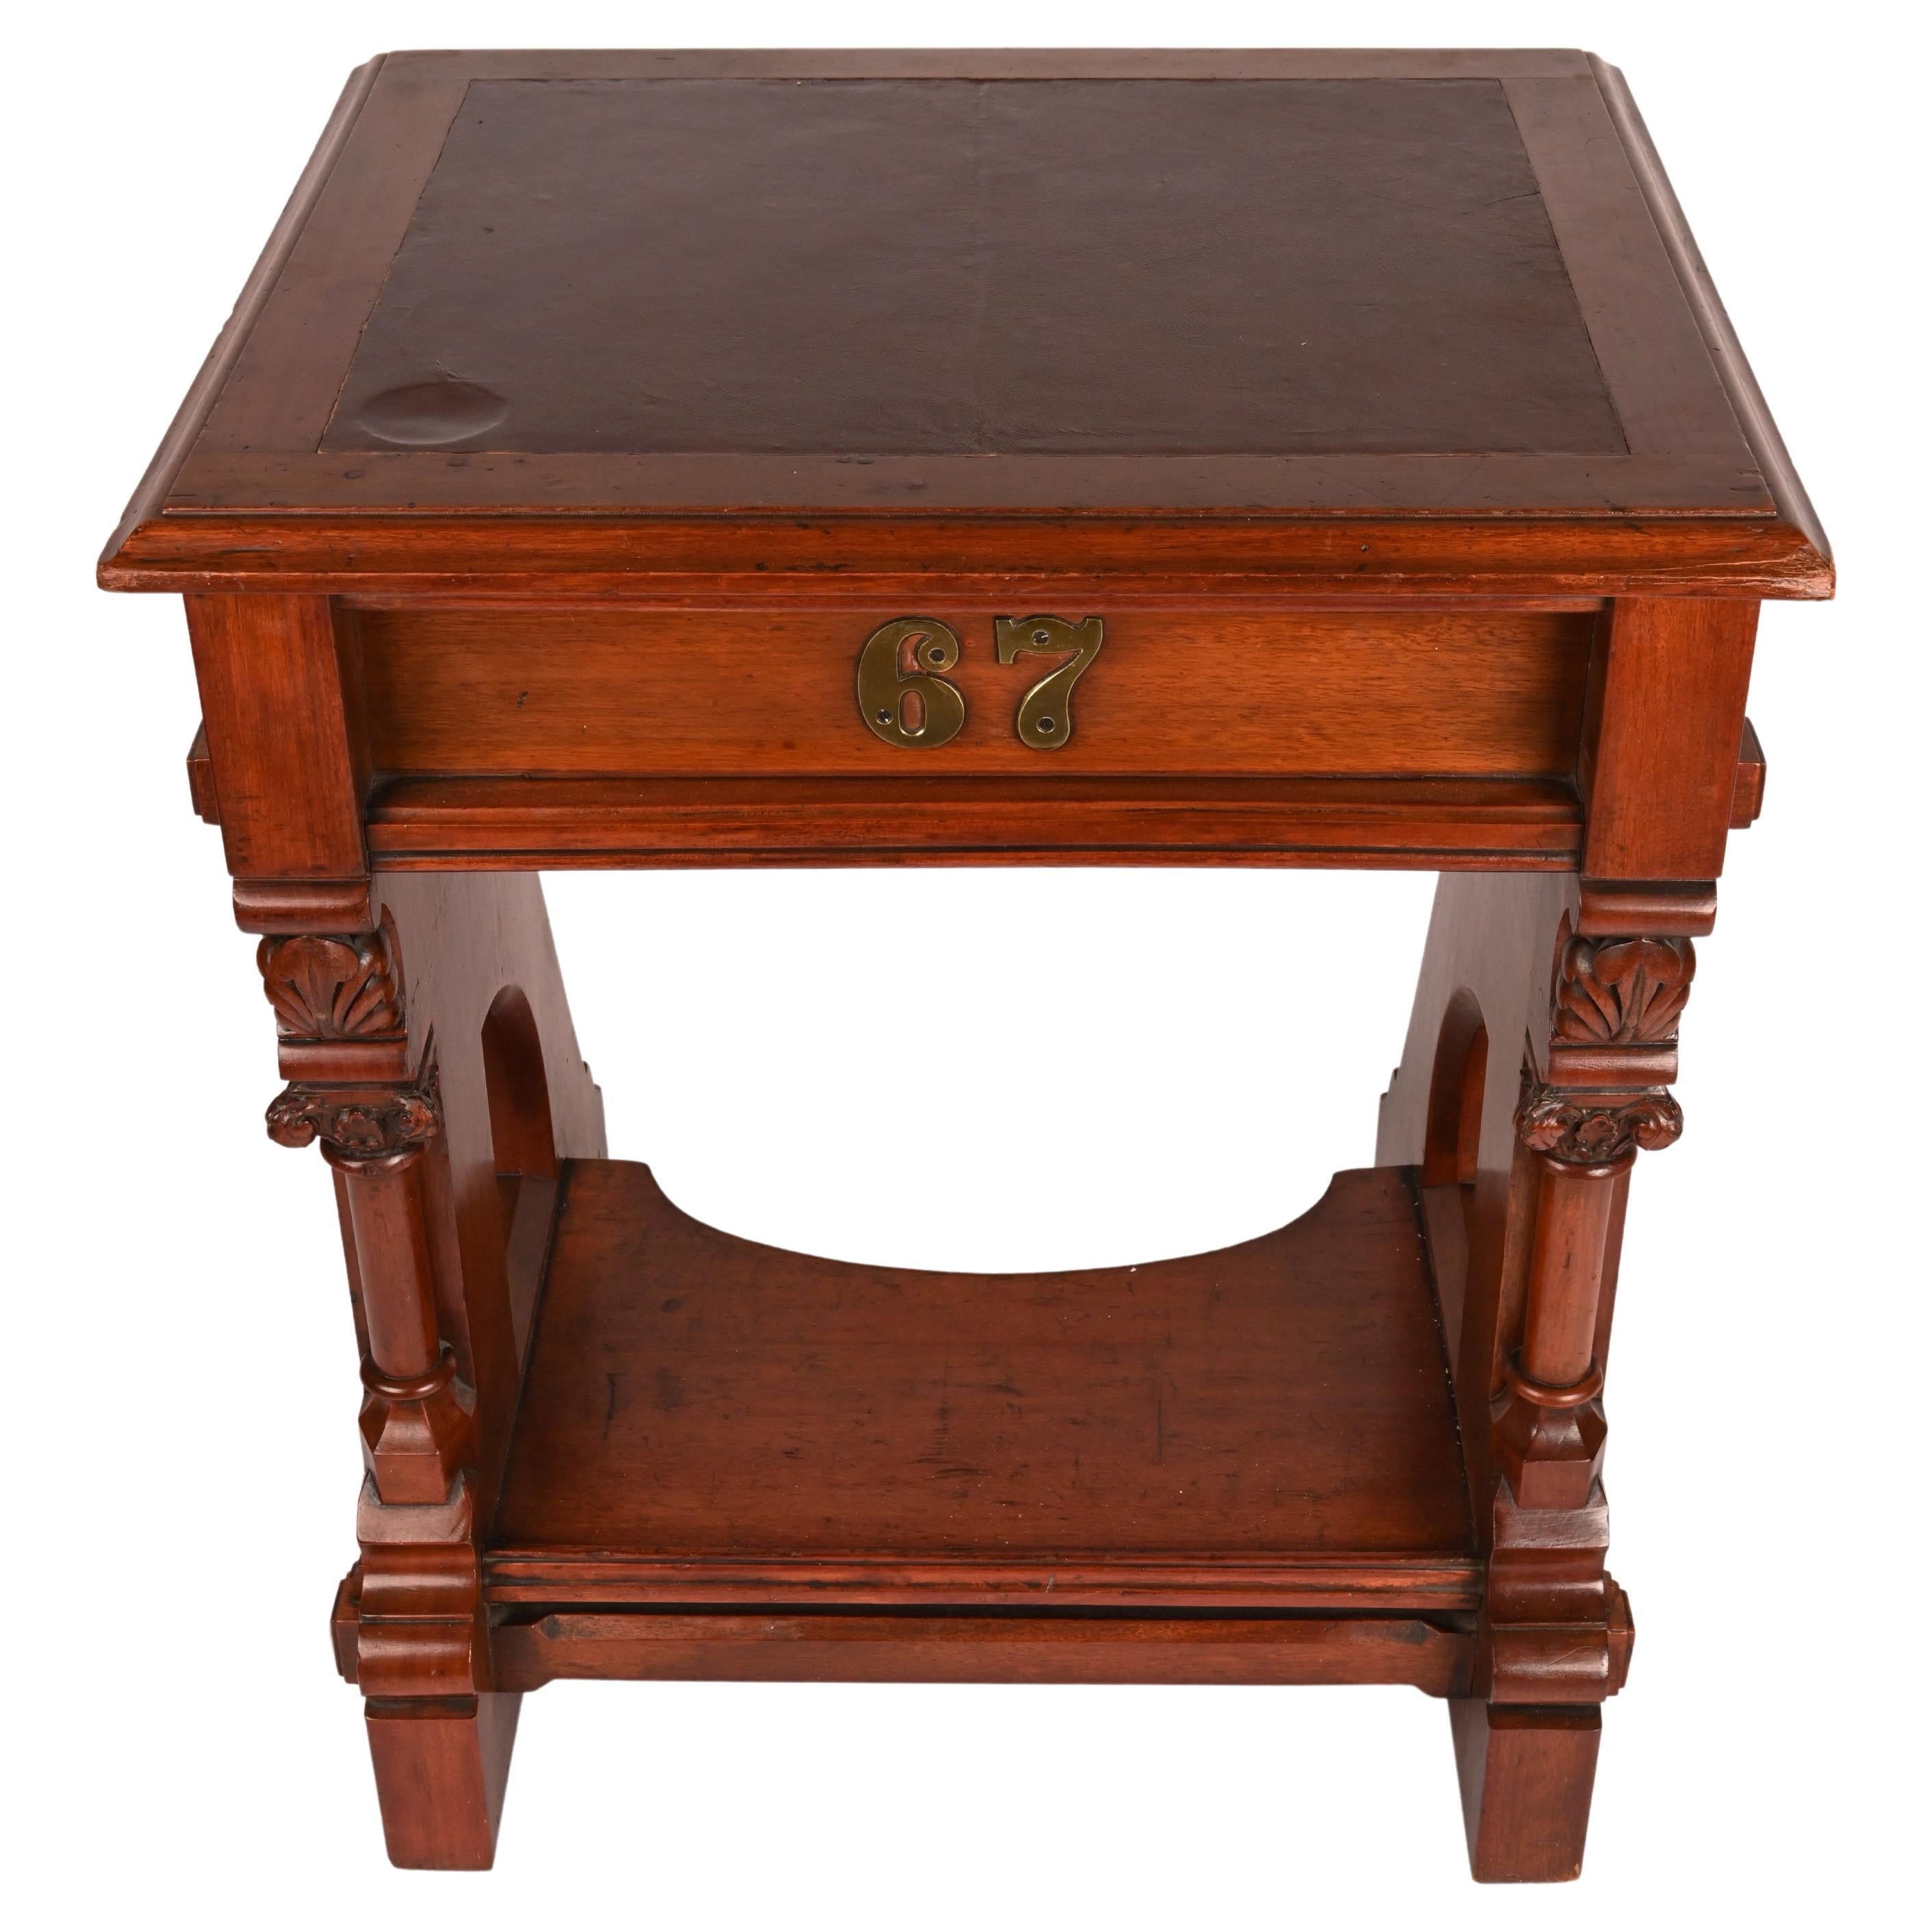 19th Century American carved cherry desk, designed by Leopold Eidlitz and made by Weller, Brown and Mesmer, Buffalo, New York, for the New York State Assembly Chamber. Front includes brass numerals ''67'' and the drawer bears several scrawled names